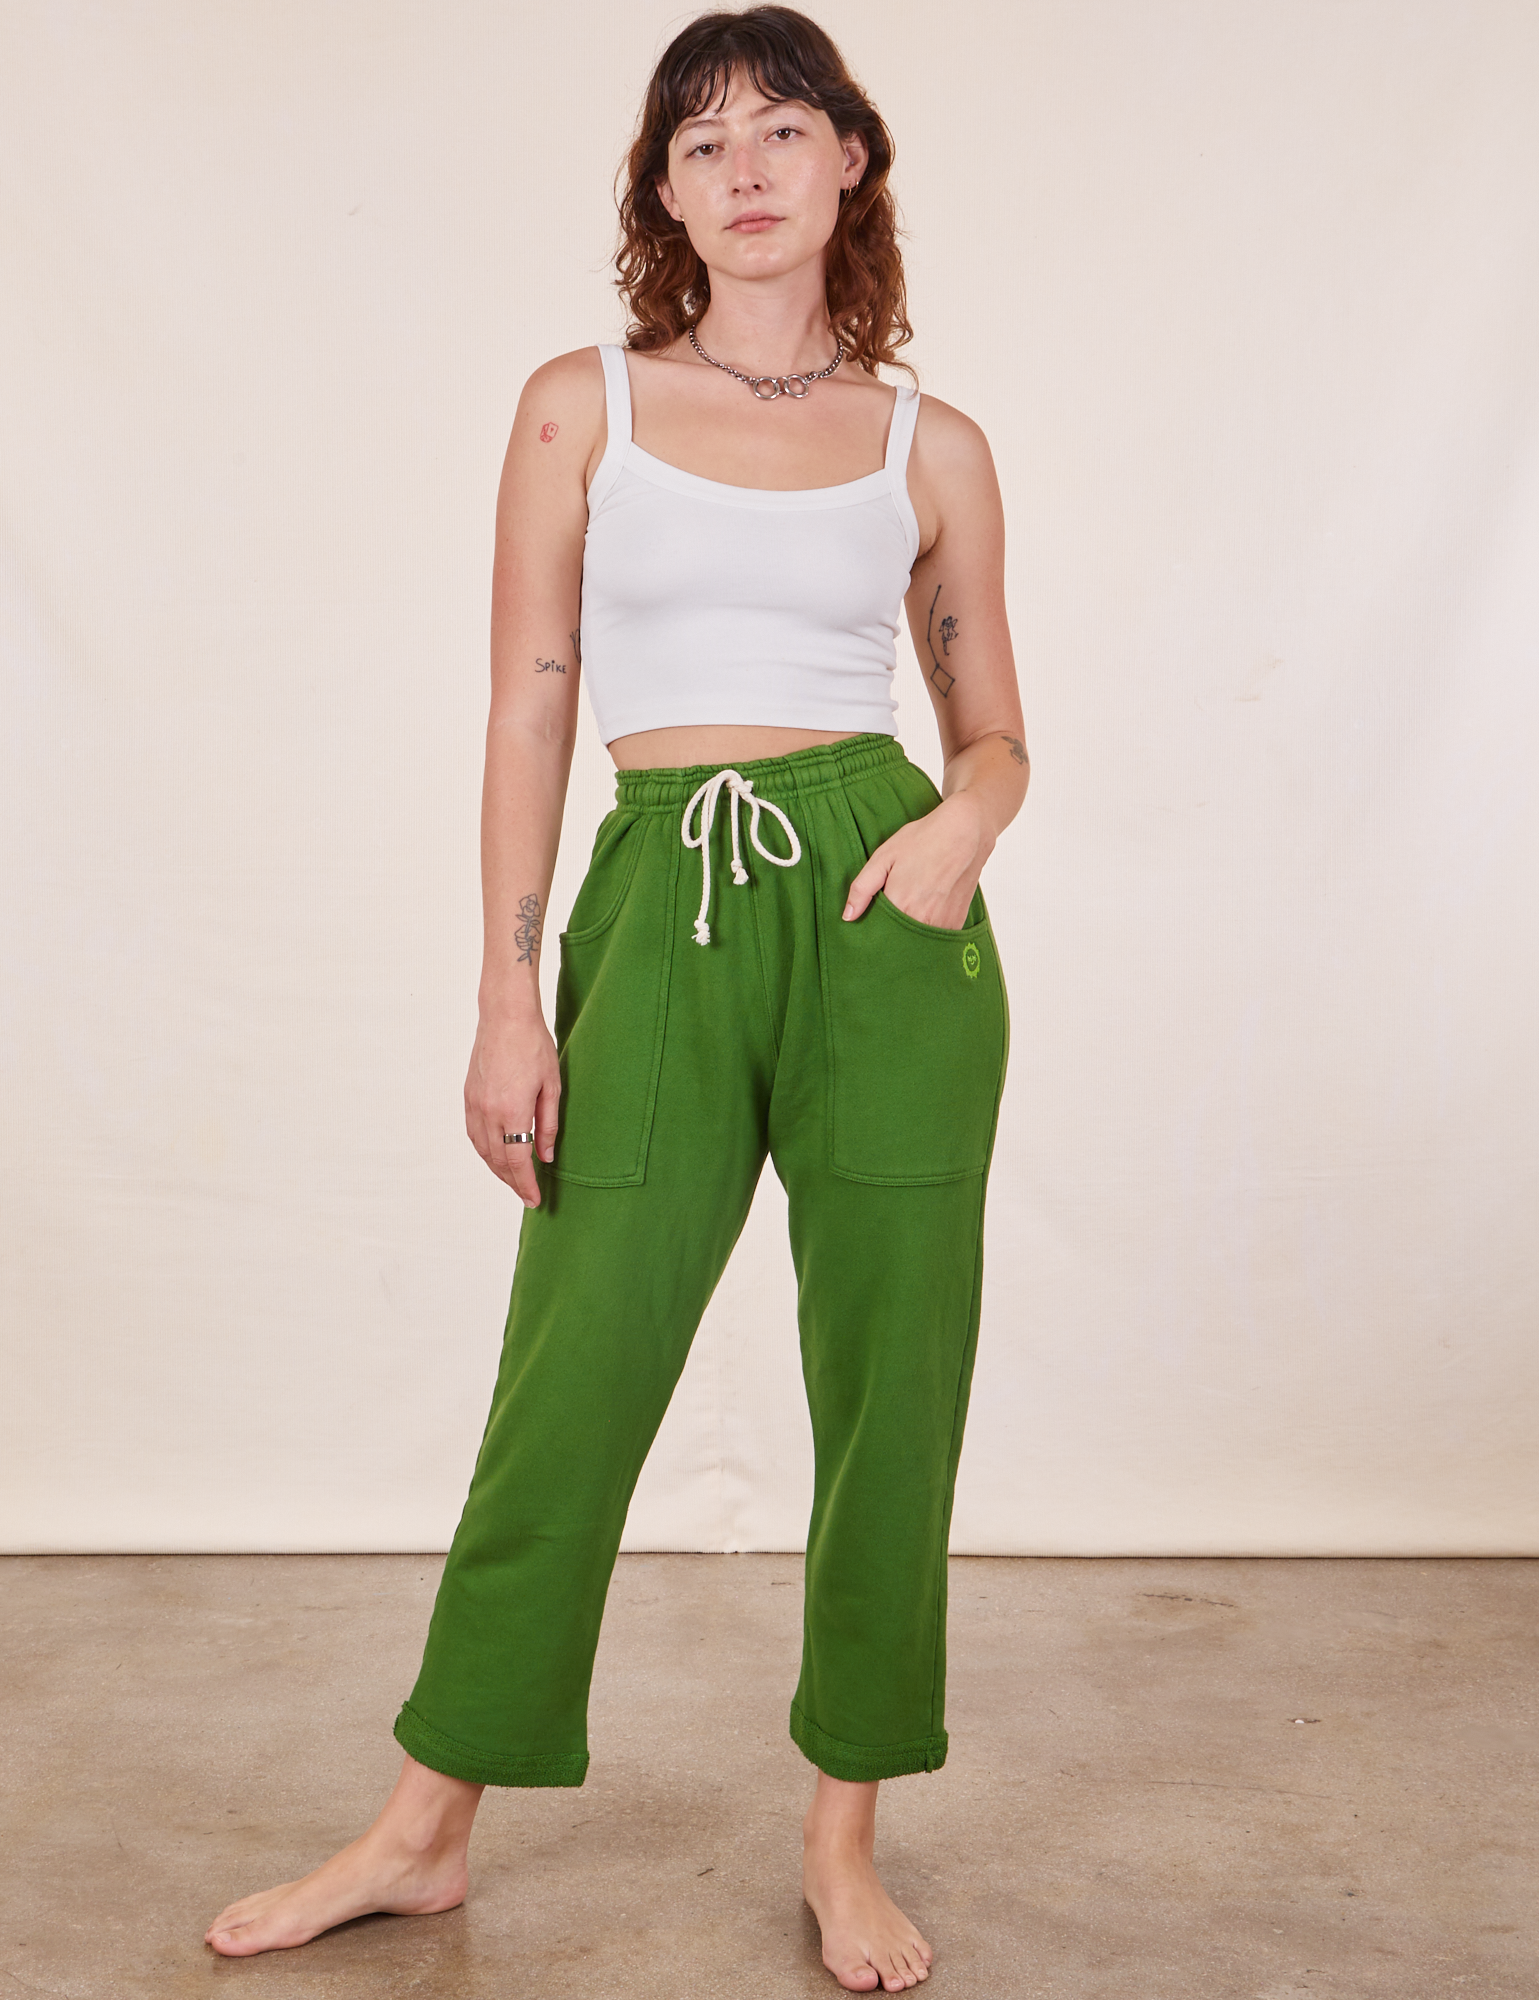 Alex is wearing Cropped Rolled Cuff Sweatpants in Lawn Green and vintage off-white Cami